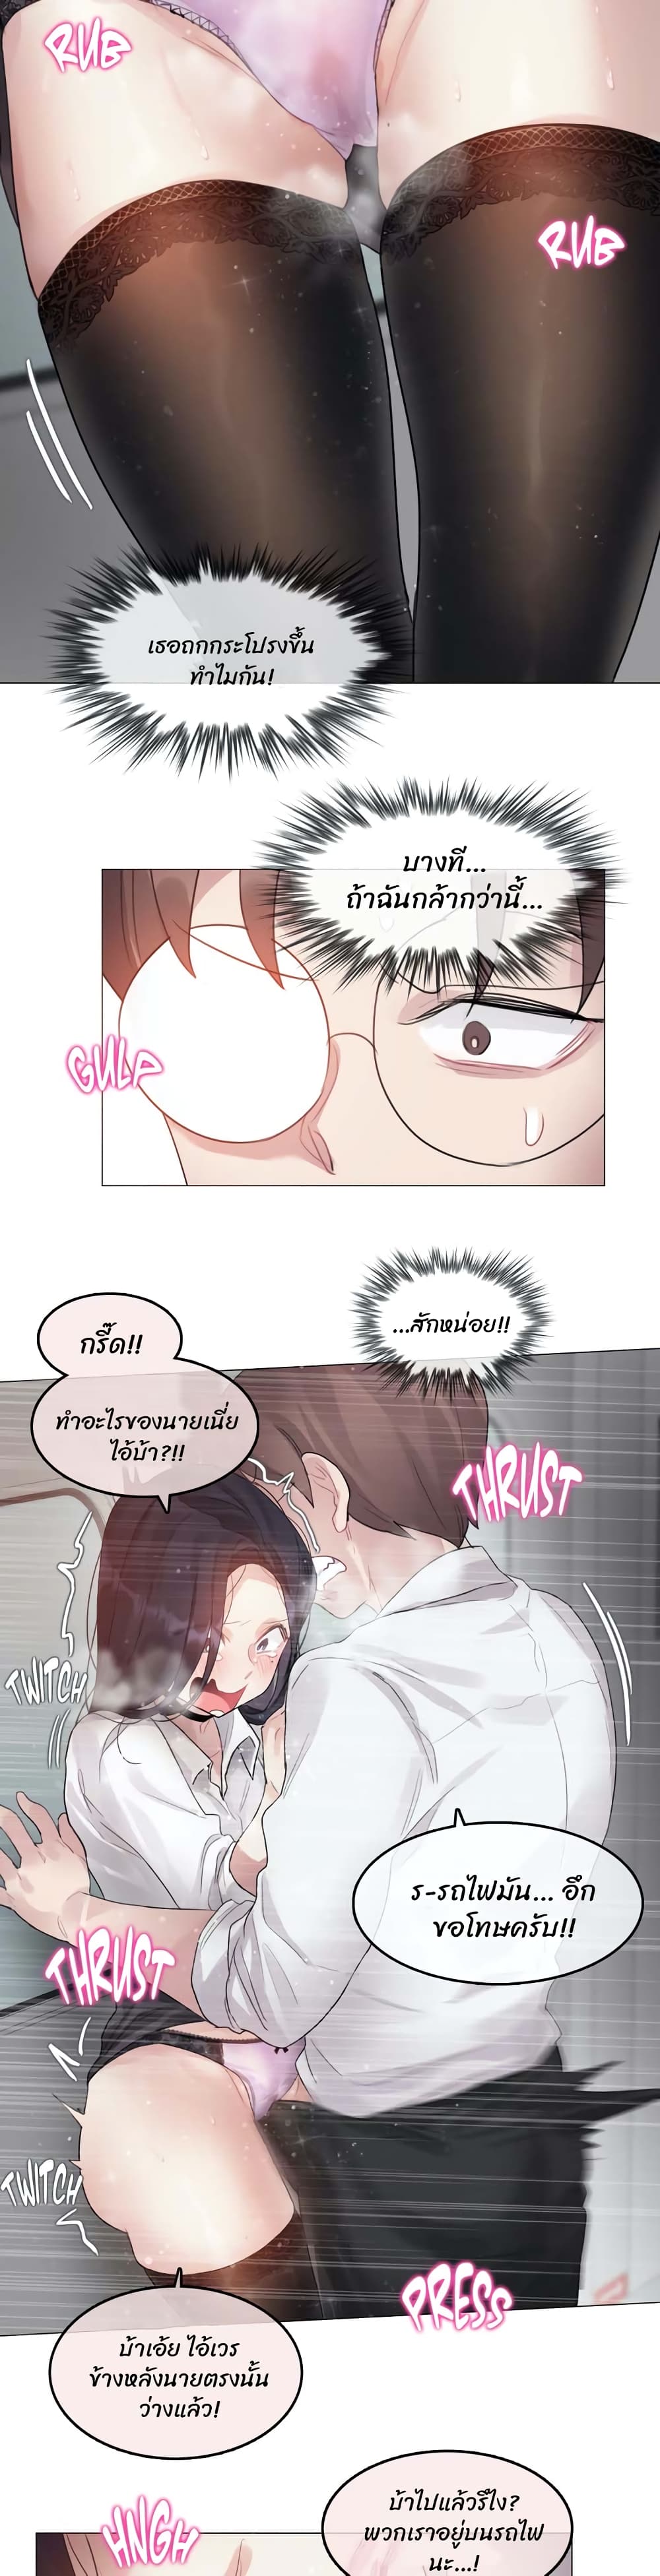 A Pervert's Daily Life 98 (16)